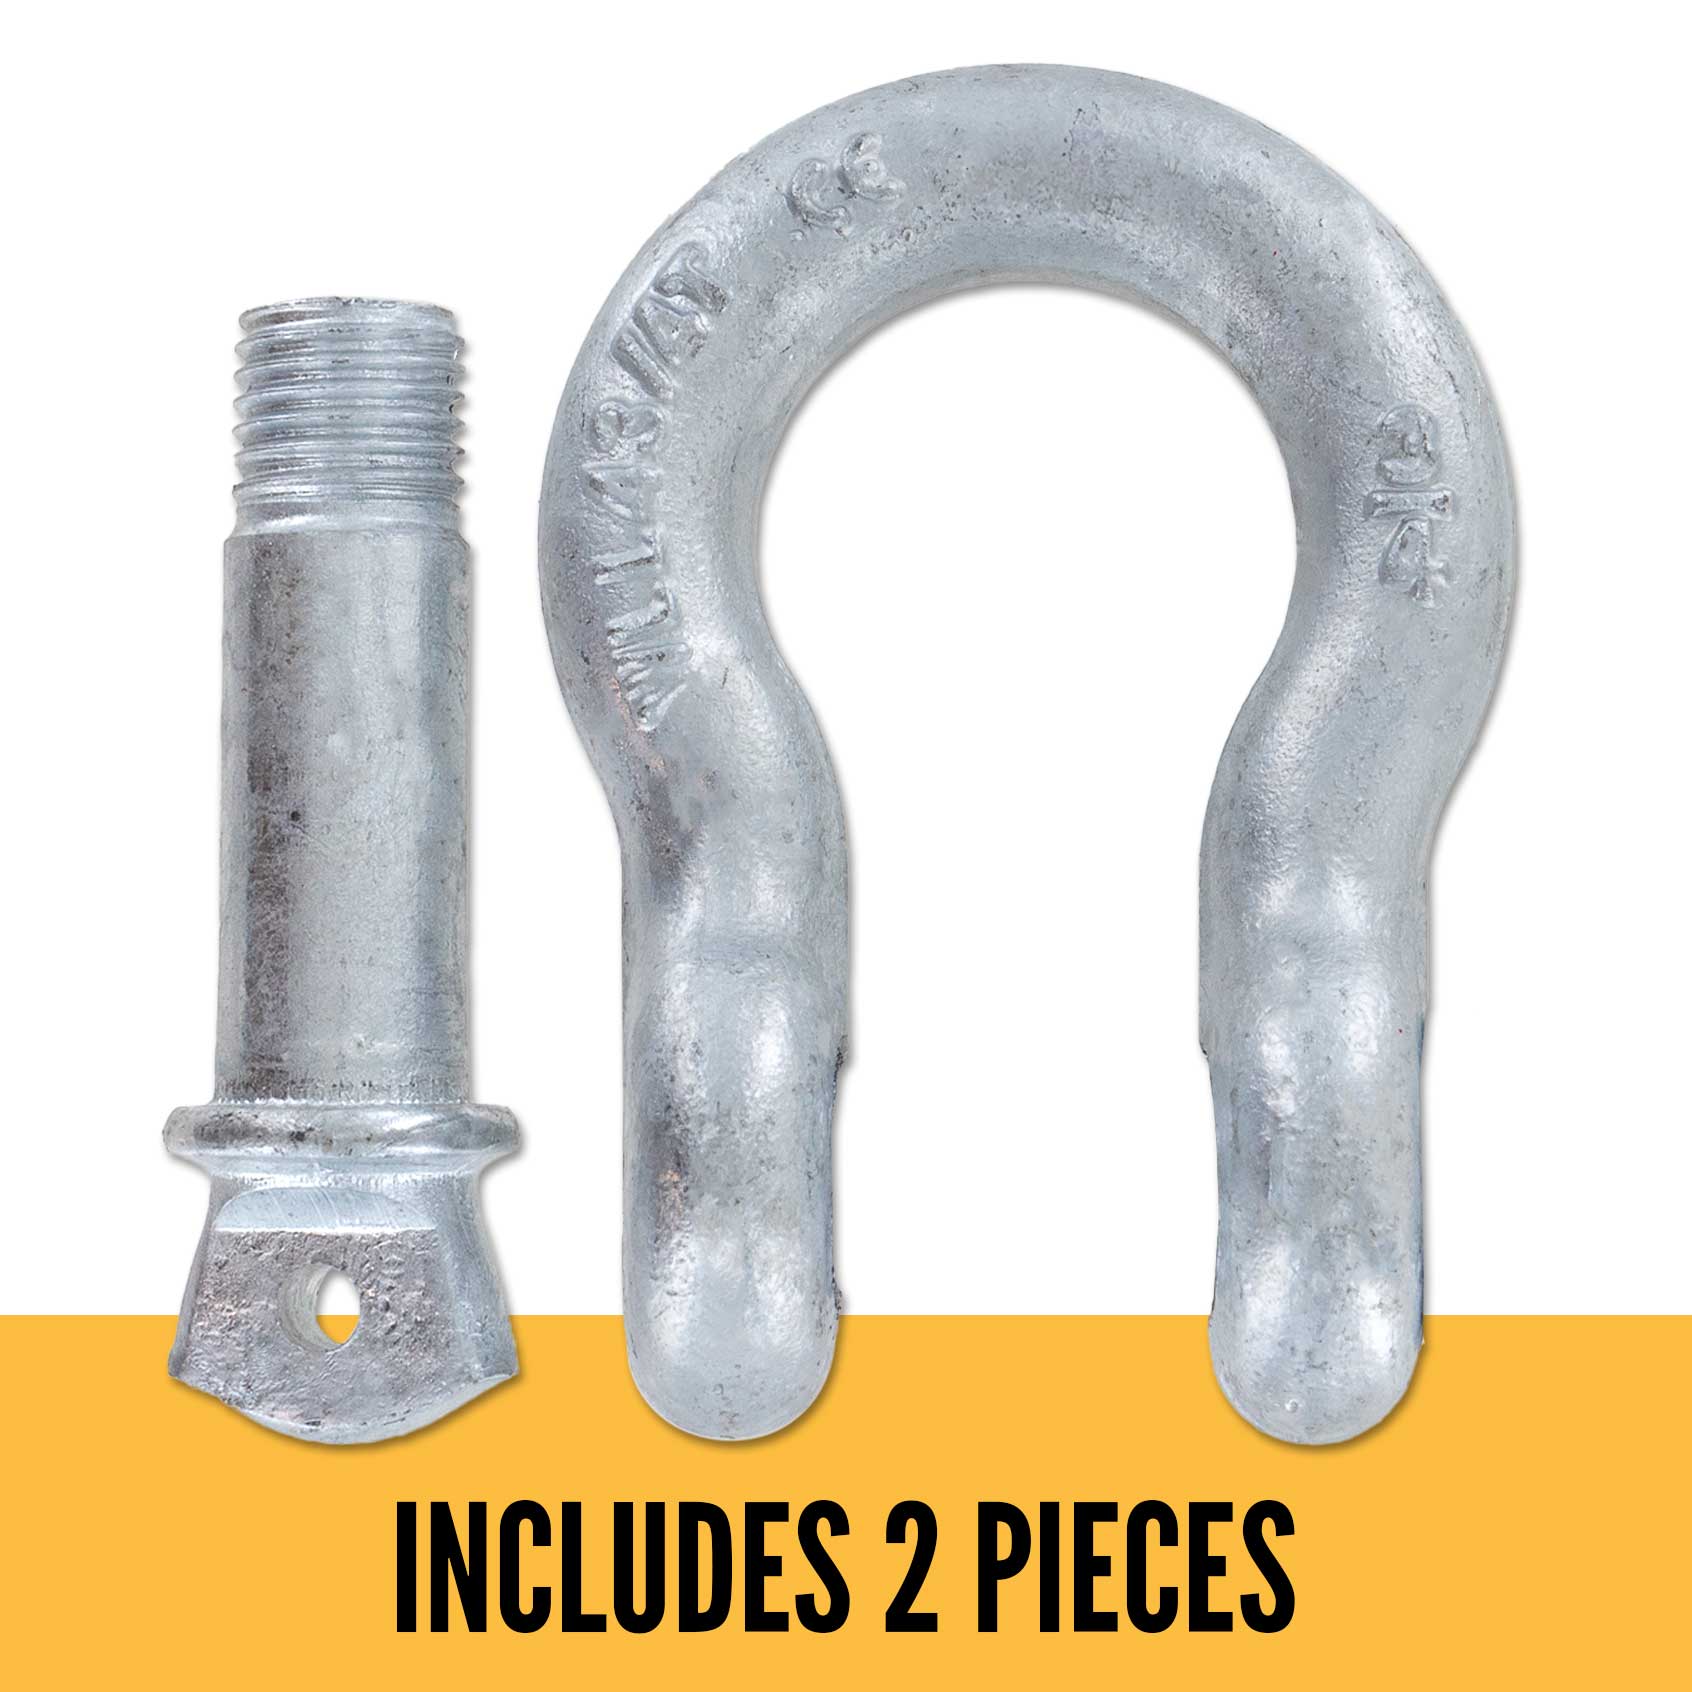 7/8" Galvanized Screw Pin Anchor Shackle - 6.5 Ton parts of a shackle